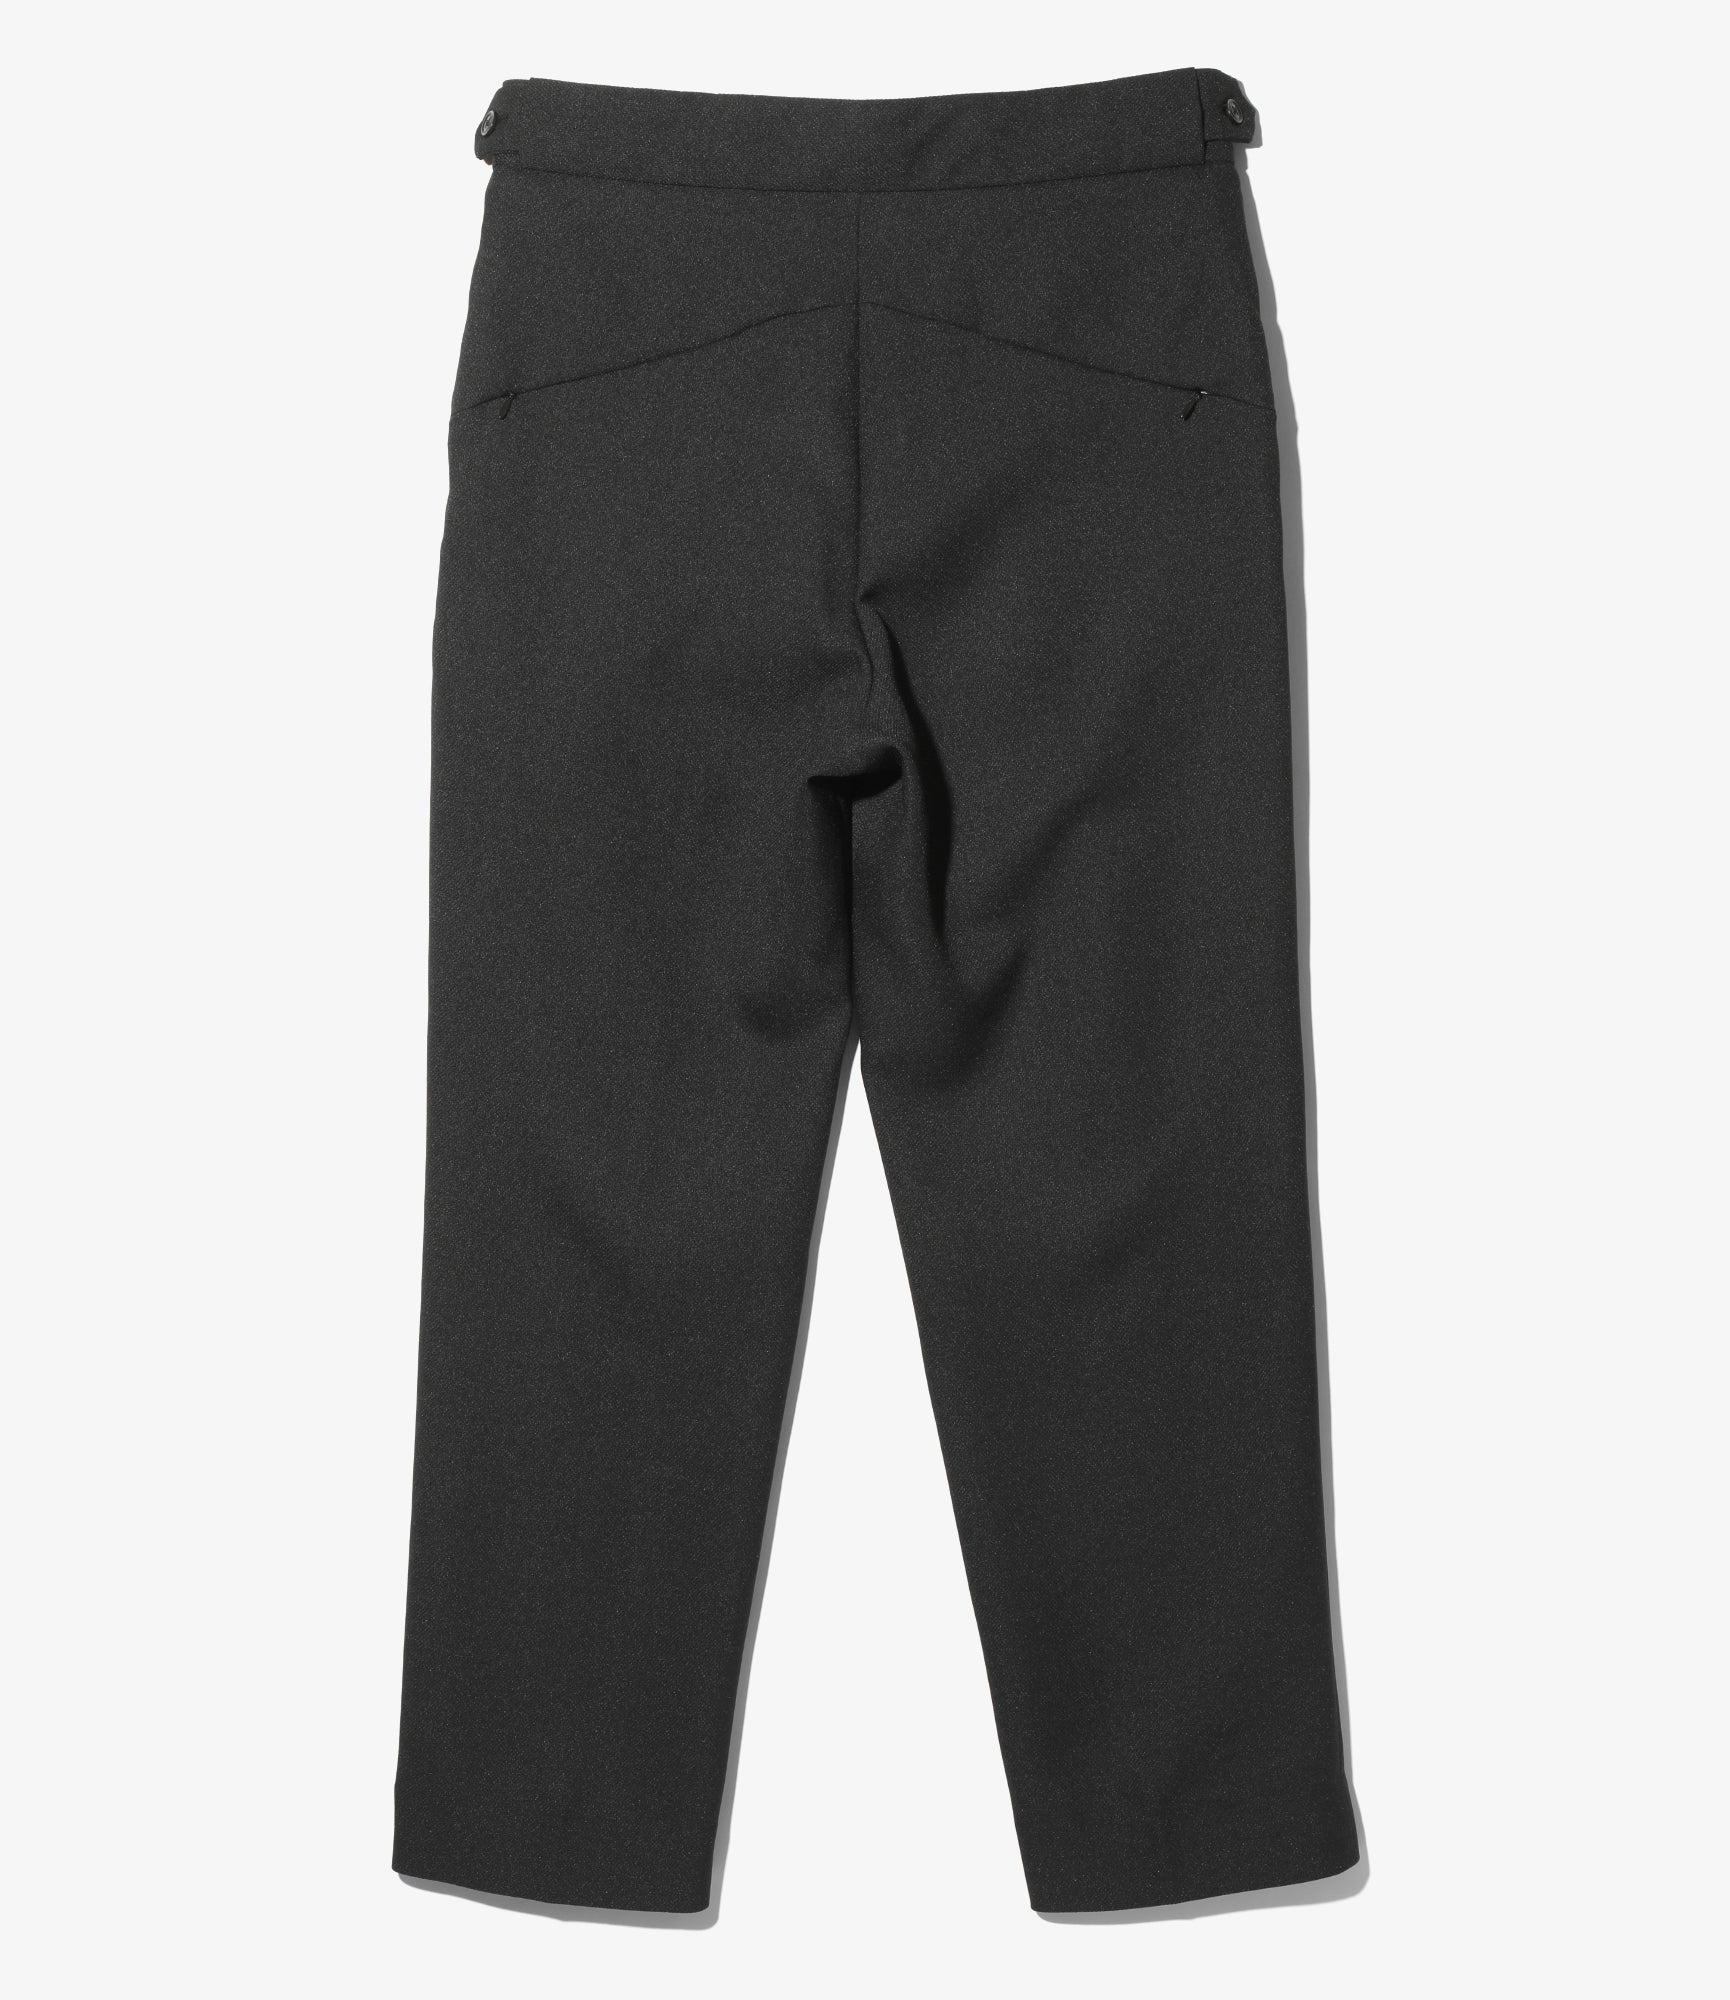 Needles Tucked Side Tab Trouser - Poly Dobby Cloth - Black